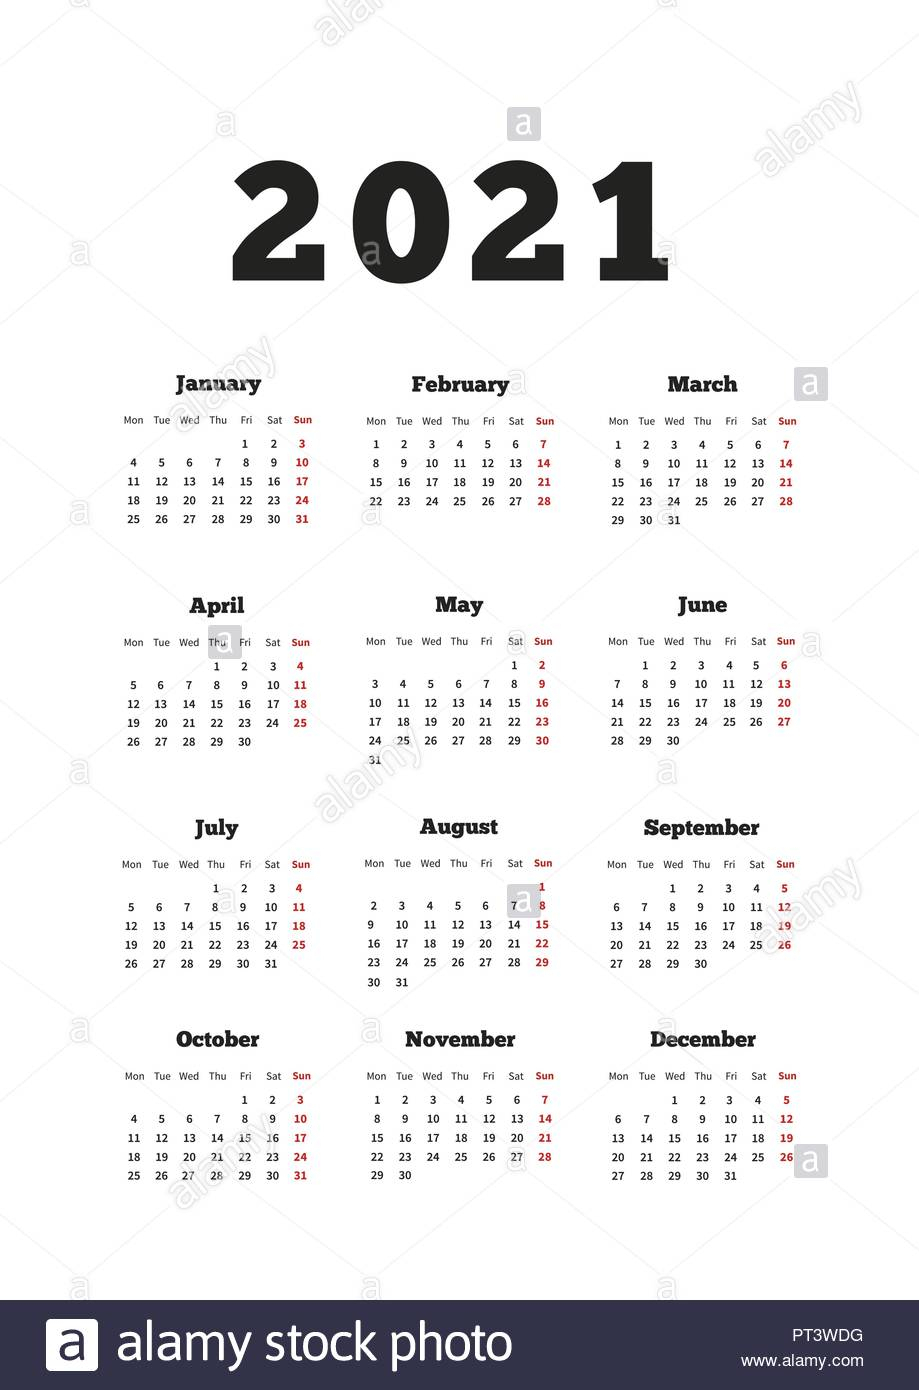 Calendar On 2021 Year With Week Starting From Monday, A4